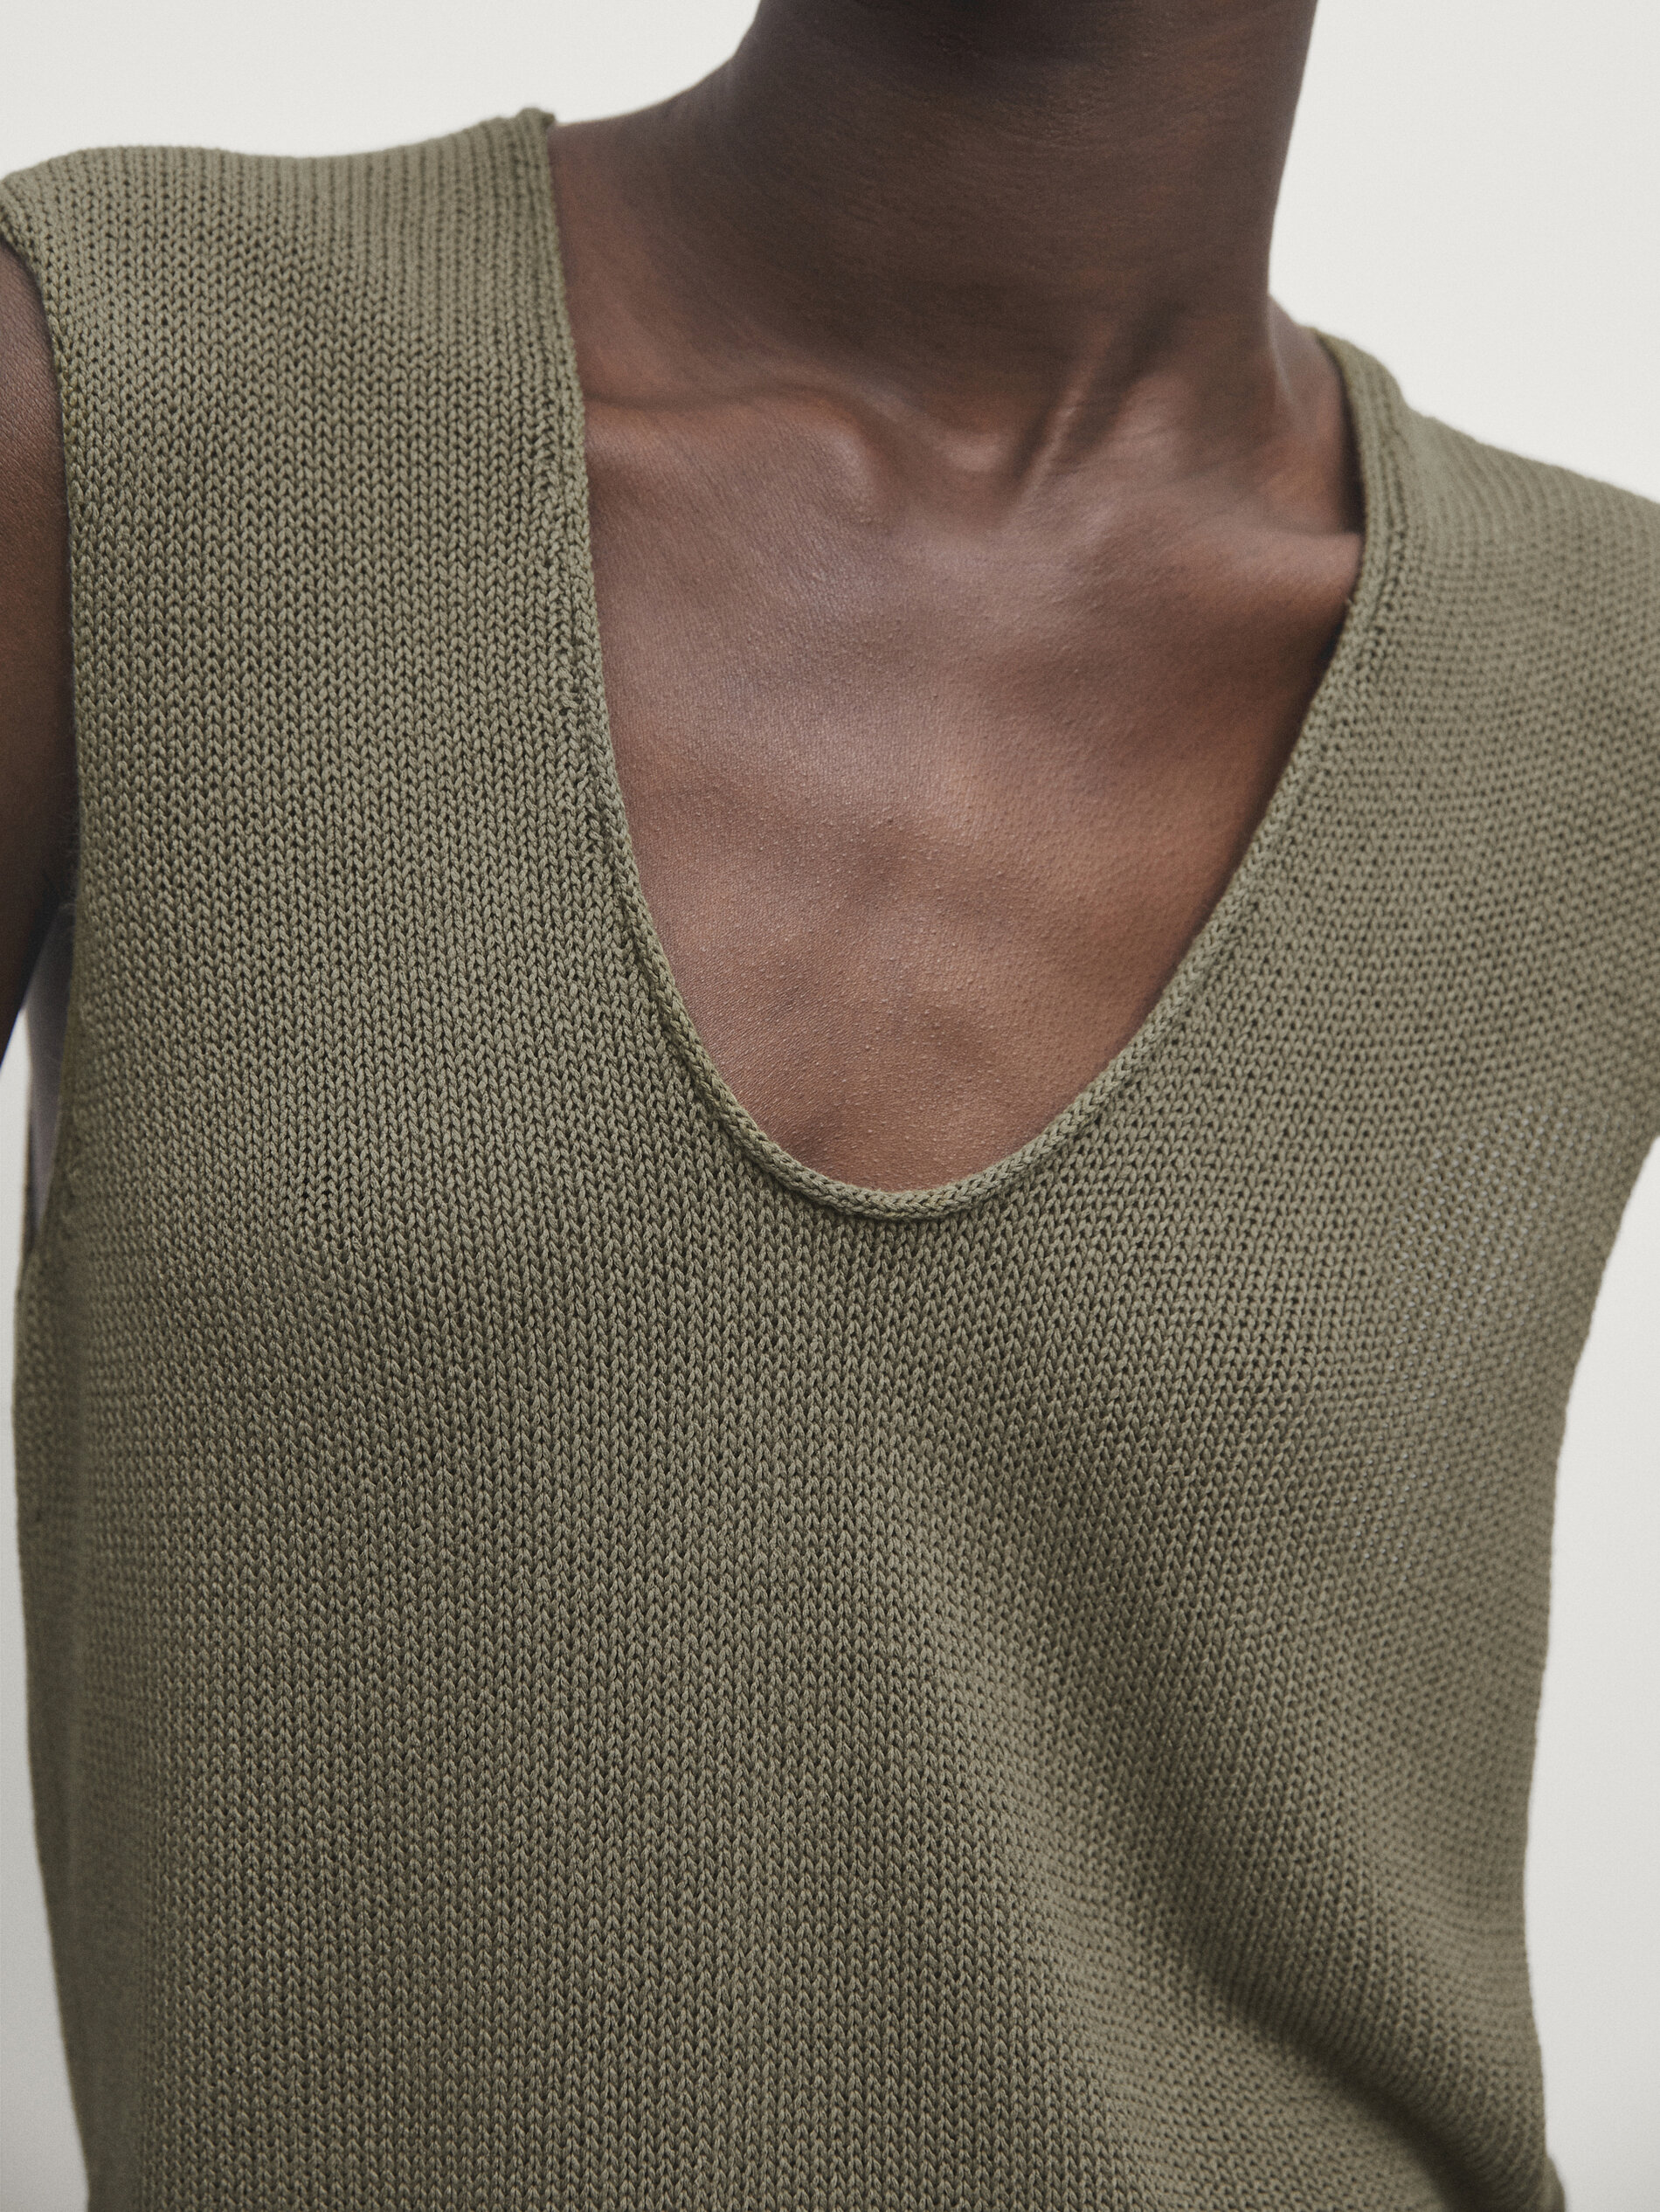 Knit top with neckline detail